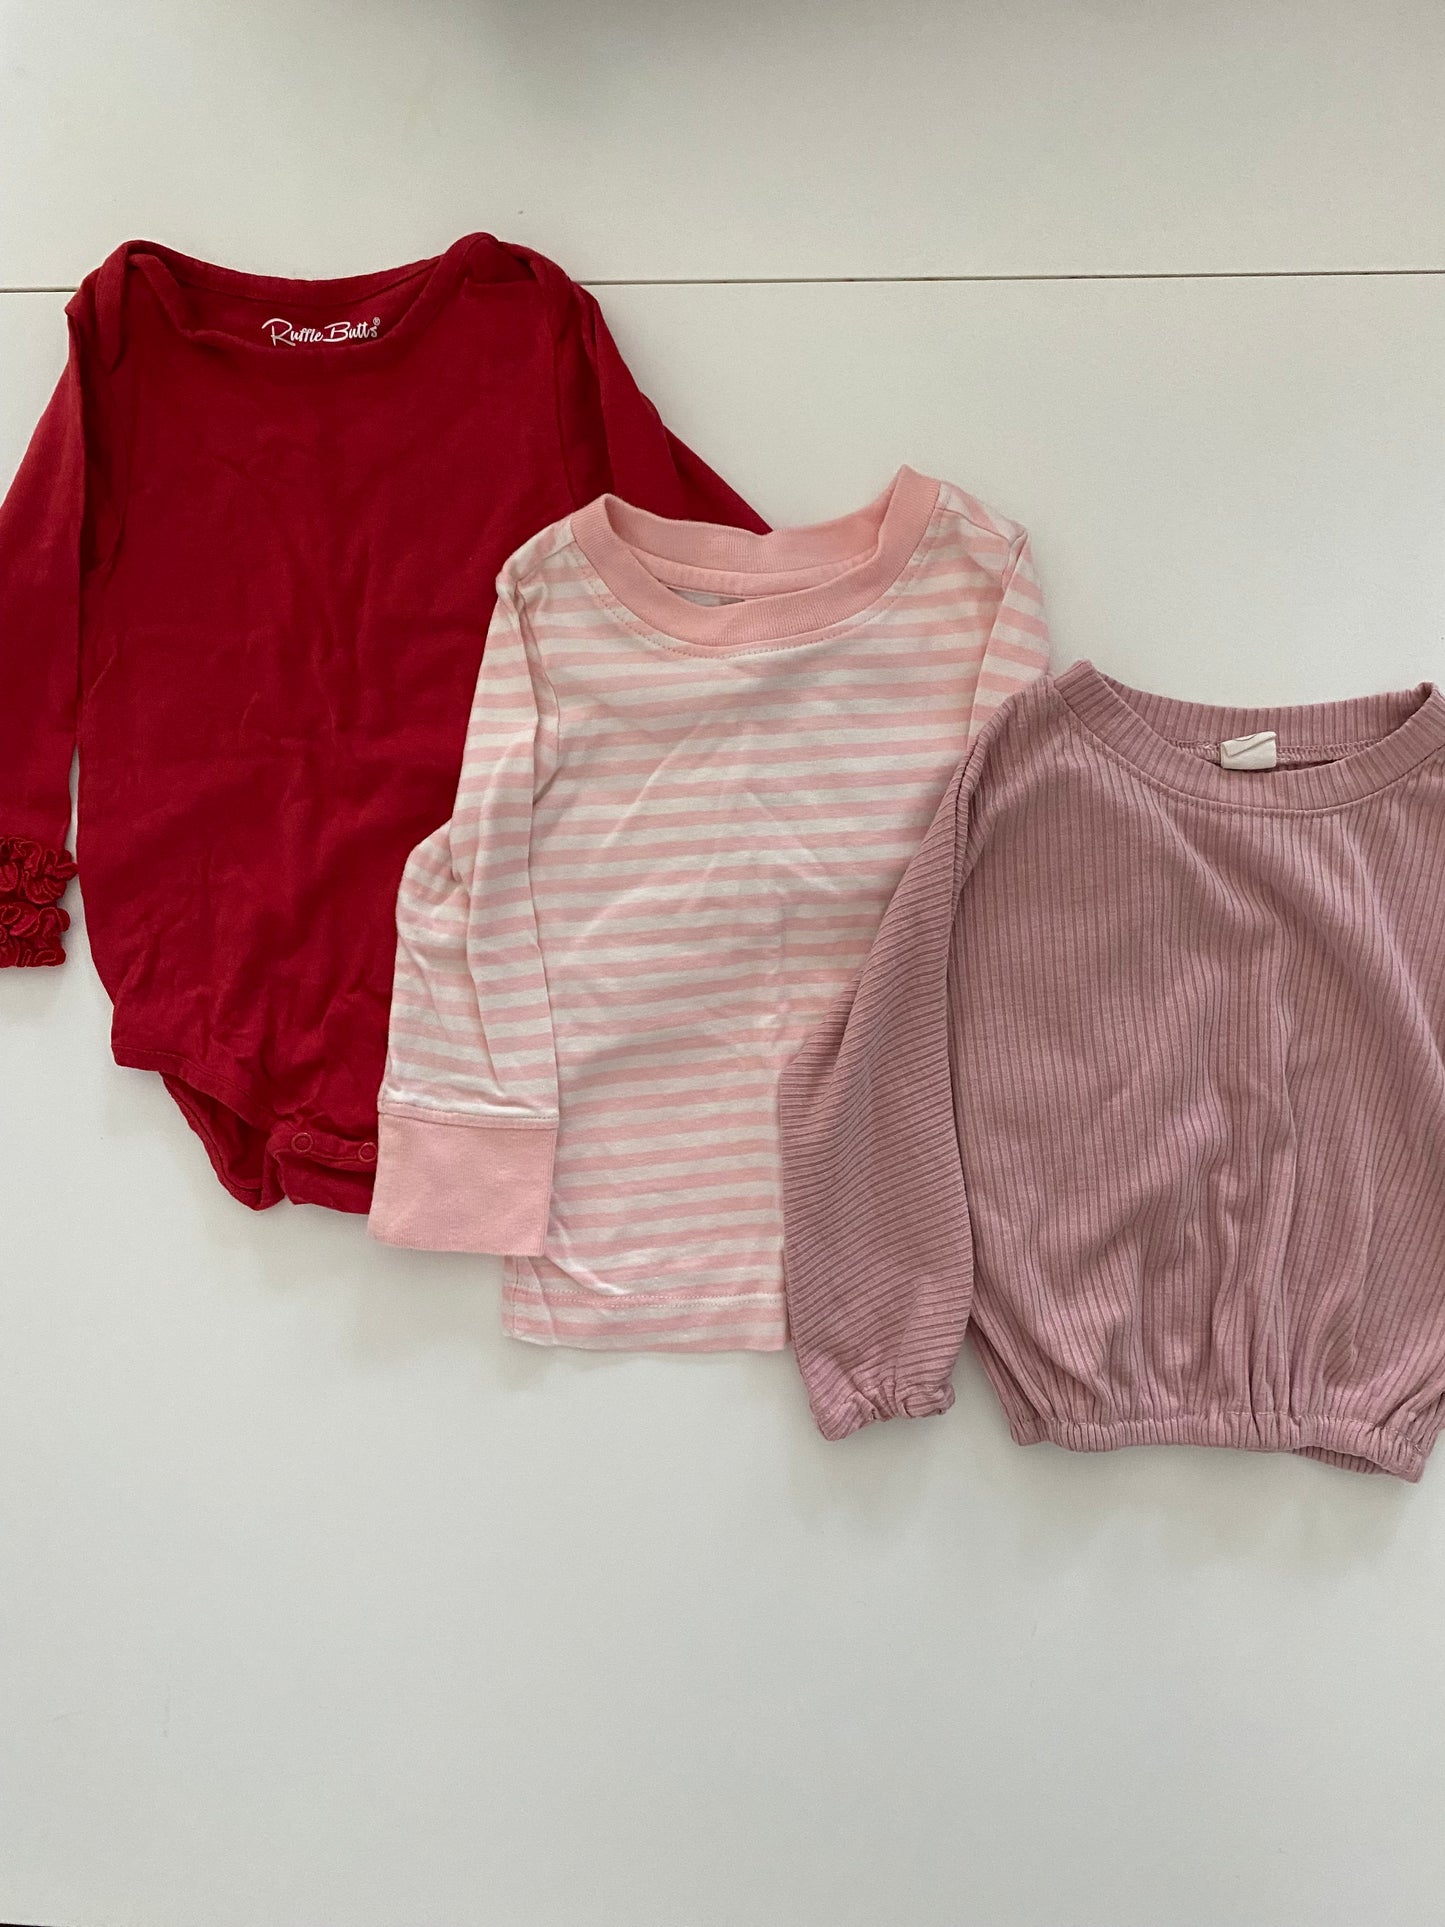 Hanna Andersson pink & white striped shirt and Ruffle Butts Red ruffle onesie and Amazon Blush Pink long-sleeved shirt bundle Girls 18-24M